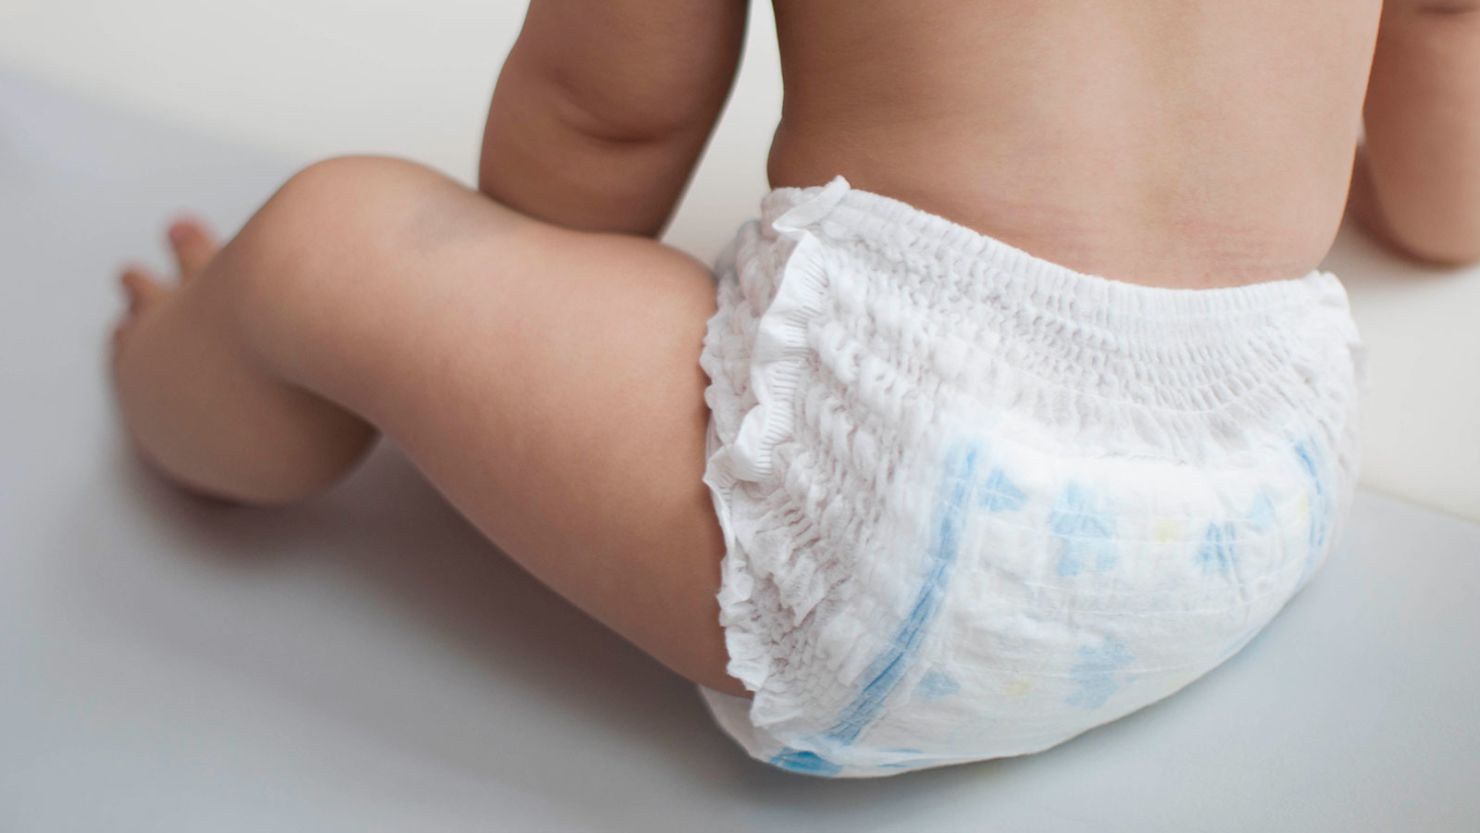 Families in Tennessee will soon be able to receive free diapers through a Medicaid program.